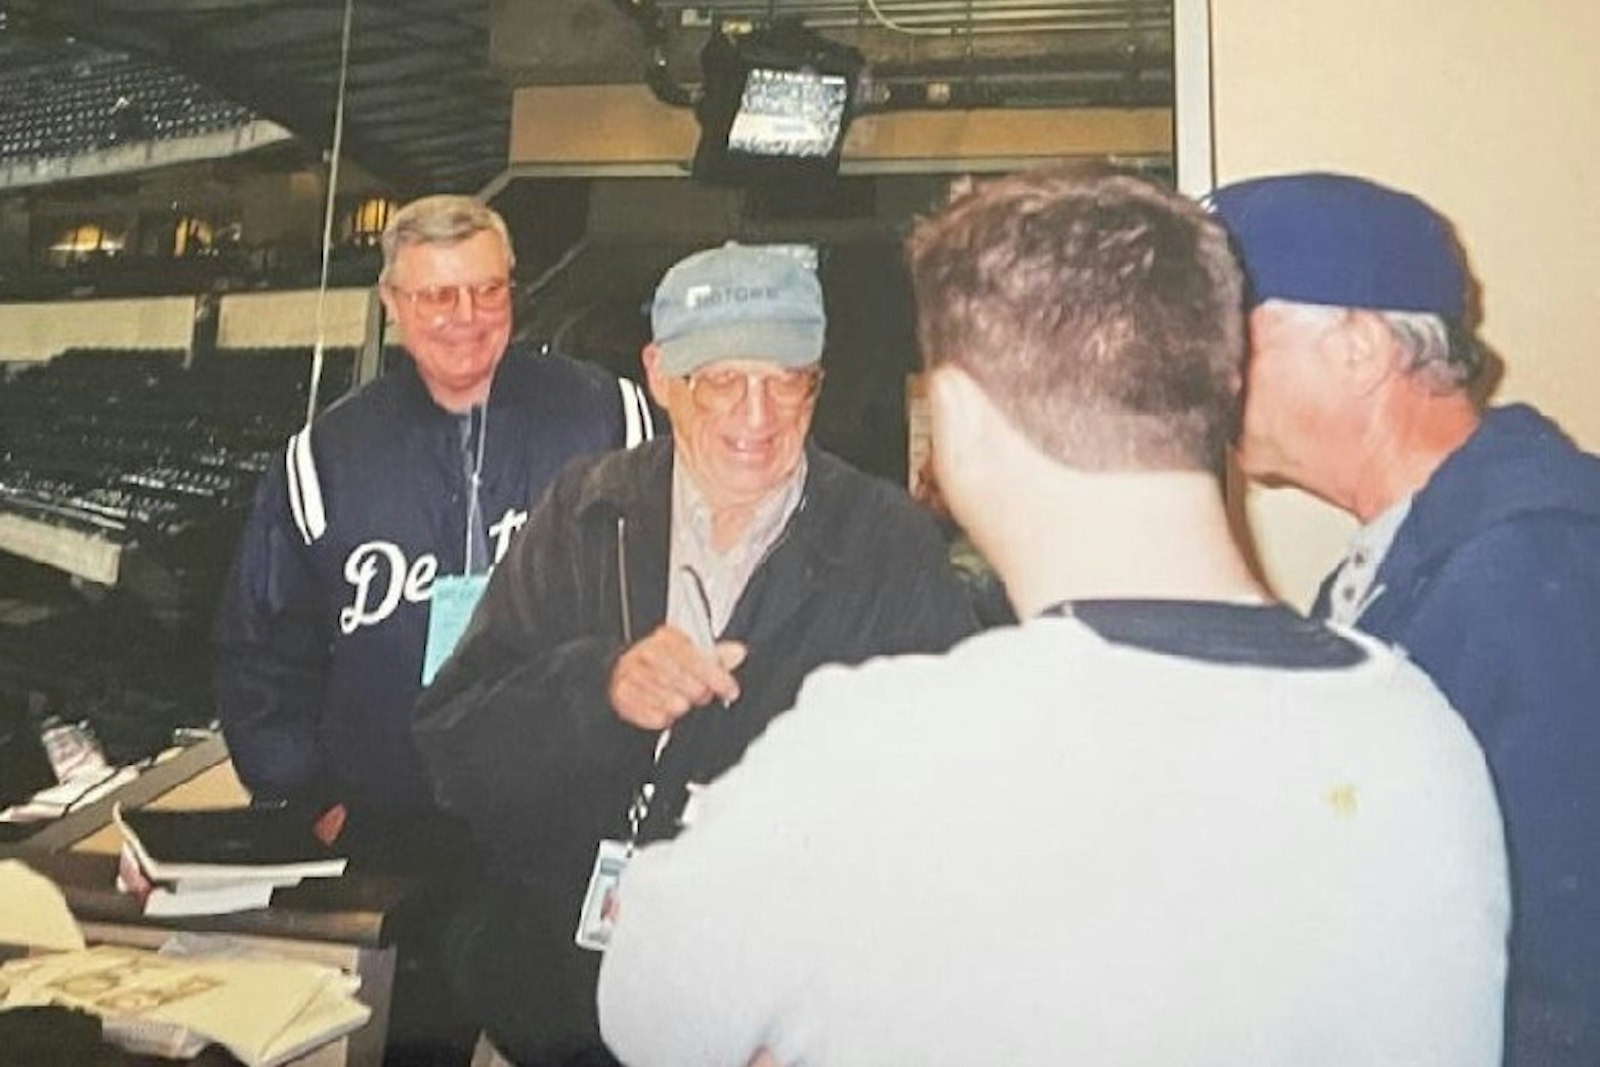 Deacon Nicholas Curran of Holy Cross Church in Santa Barbara, Calif., watches as his good friend, Detroit Tigers broadcaster Ernie Harwell, signs autographs for some visiting Tiger fans while at Angel Stadium of Anaheim. Deacon Curran’s friendship with Harwell enabled him to become a great fan of the Detroit Tigers. (Courtesy of Deacon Nicholas Curran)